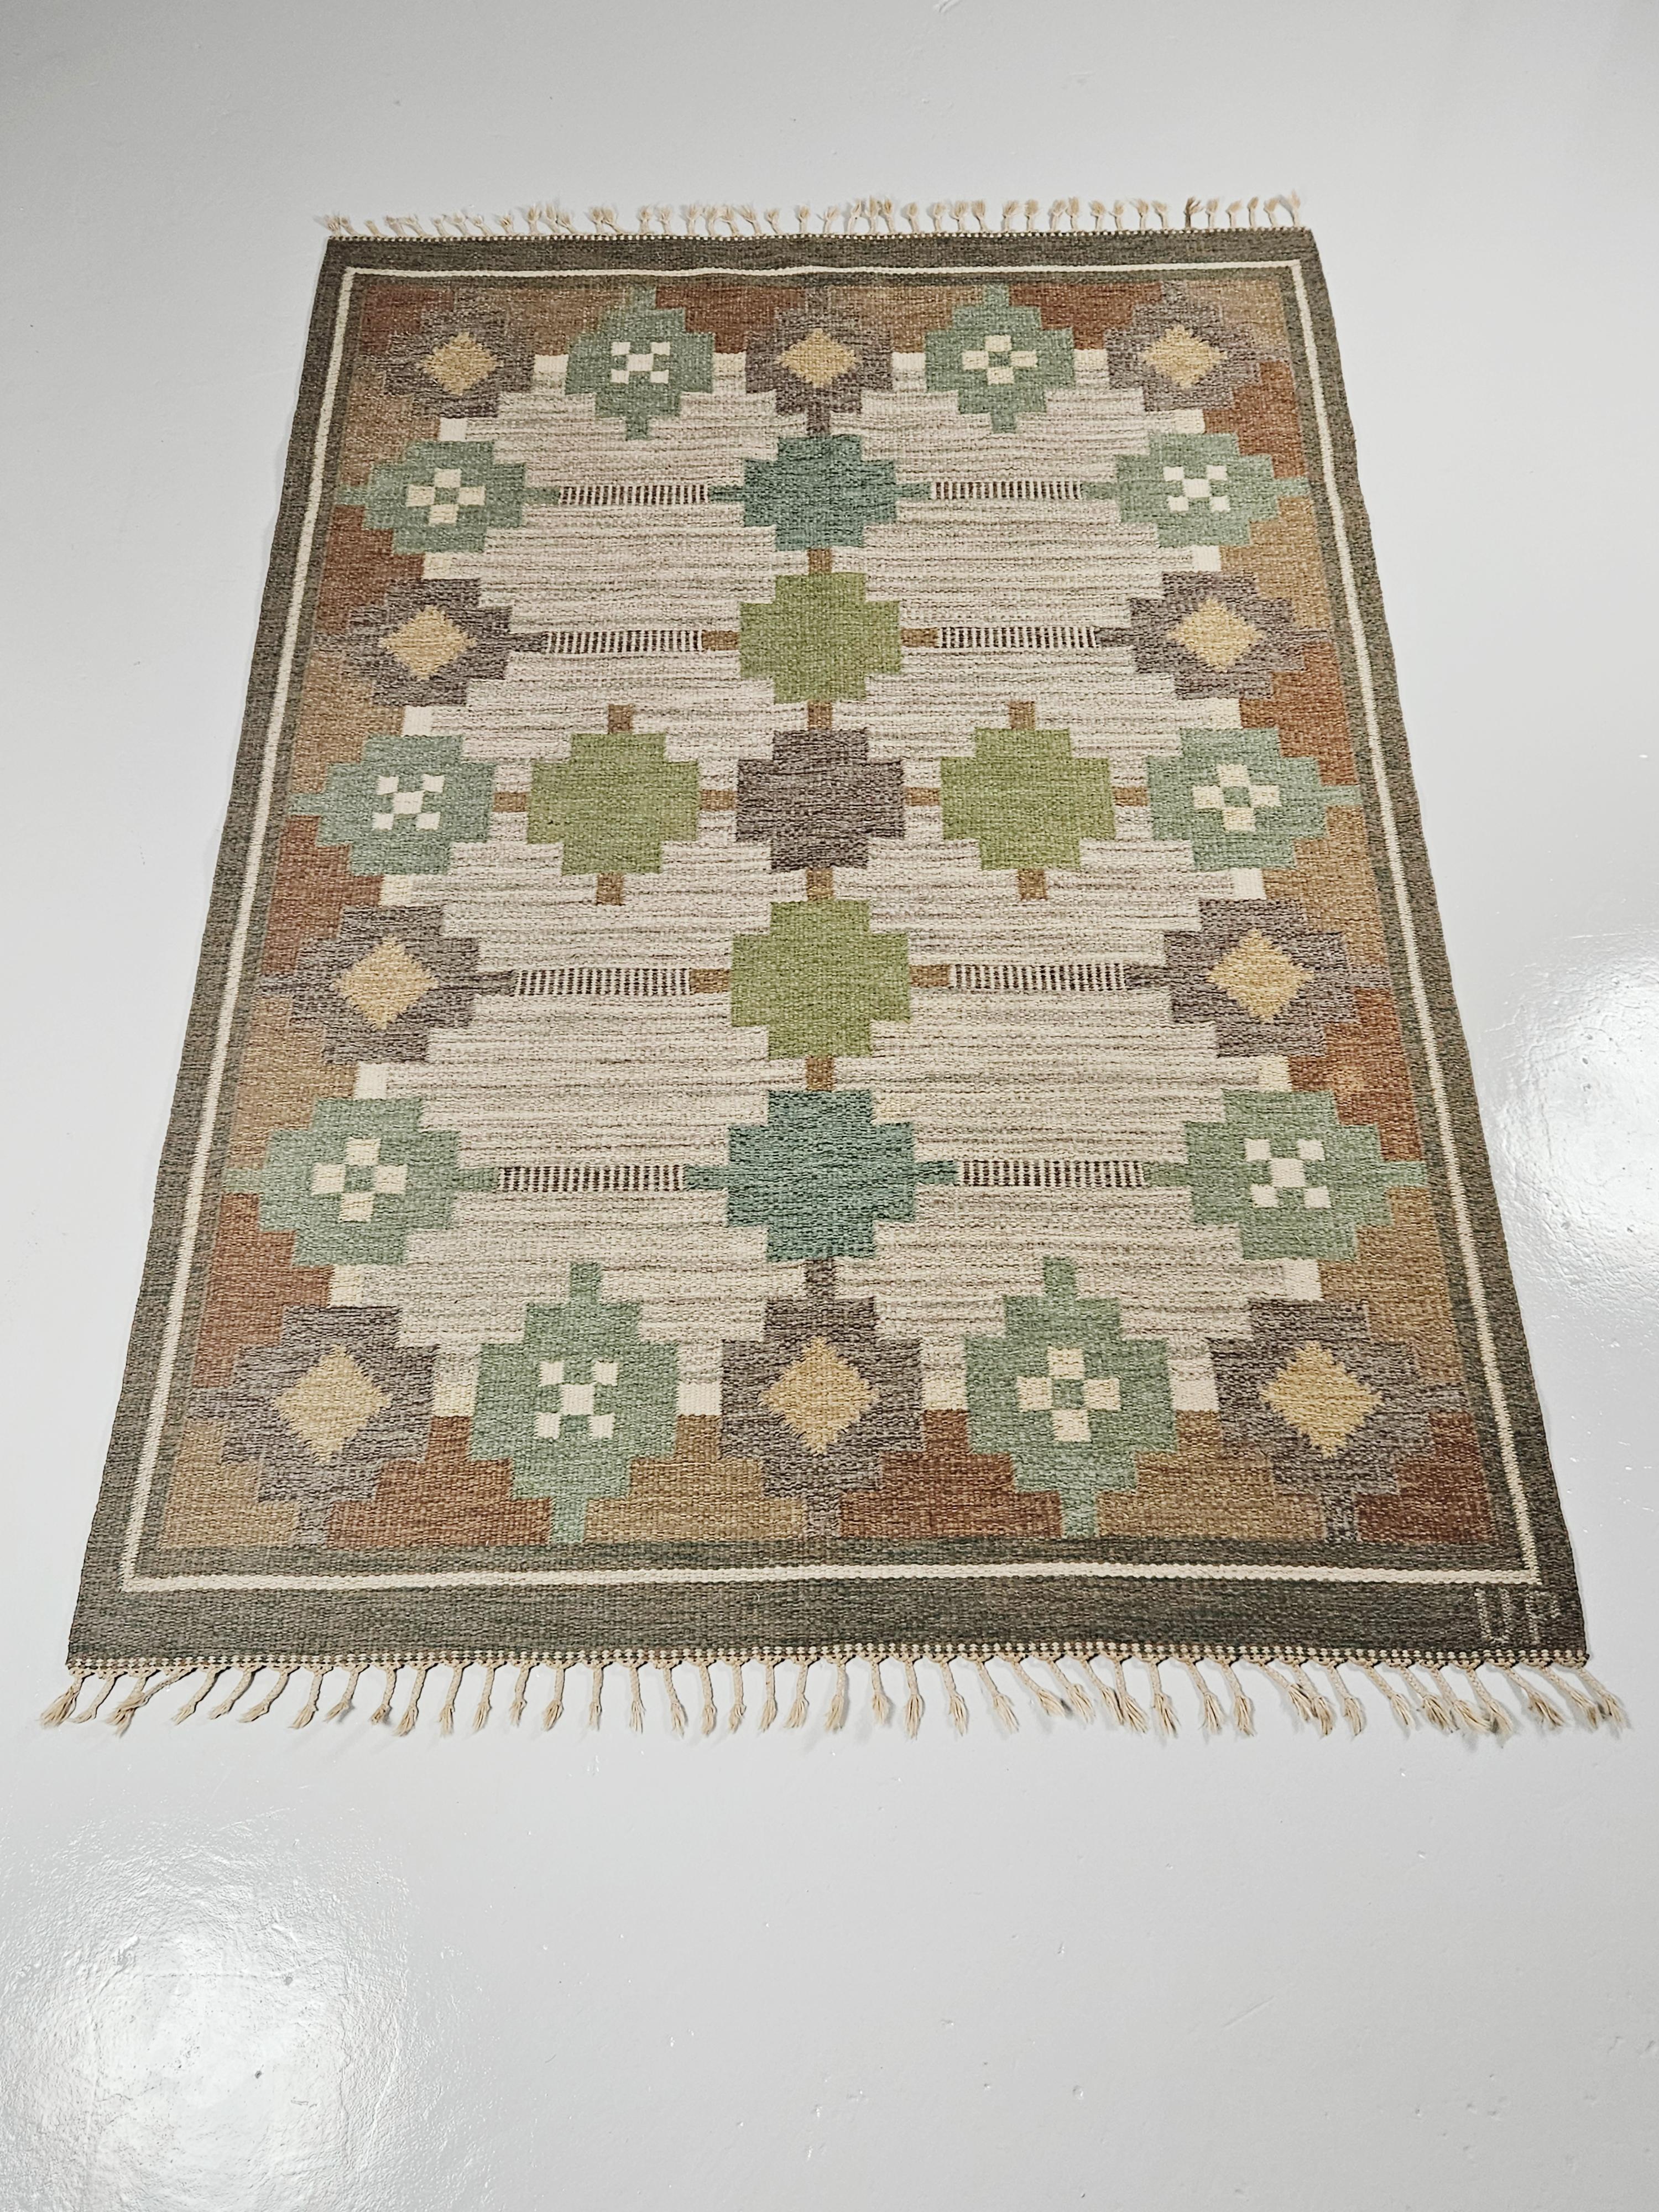 Beautiful flatweave carpet designed by Ulla Parkdahl. Made in Sweden during the middle of the 20th century. 

Great earthy tones.